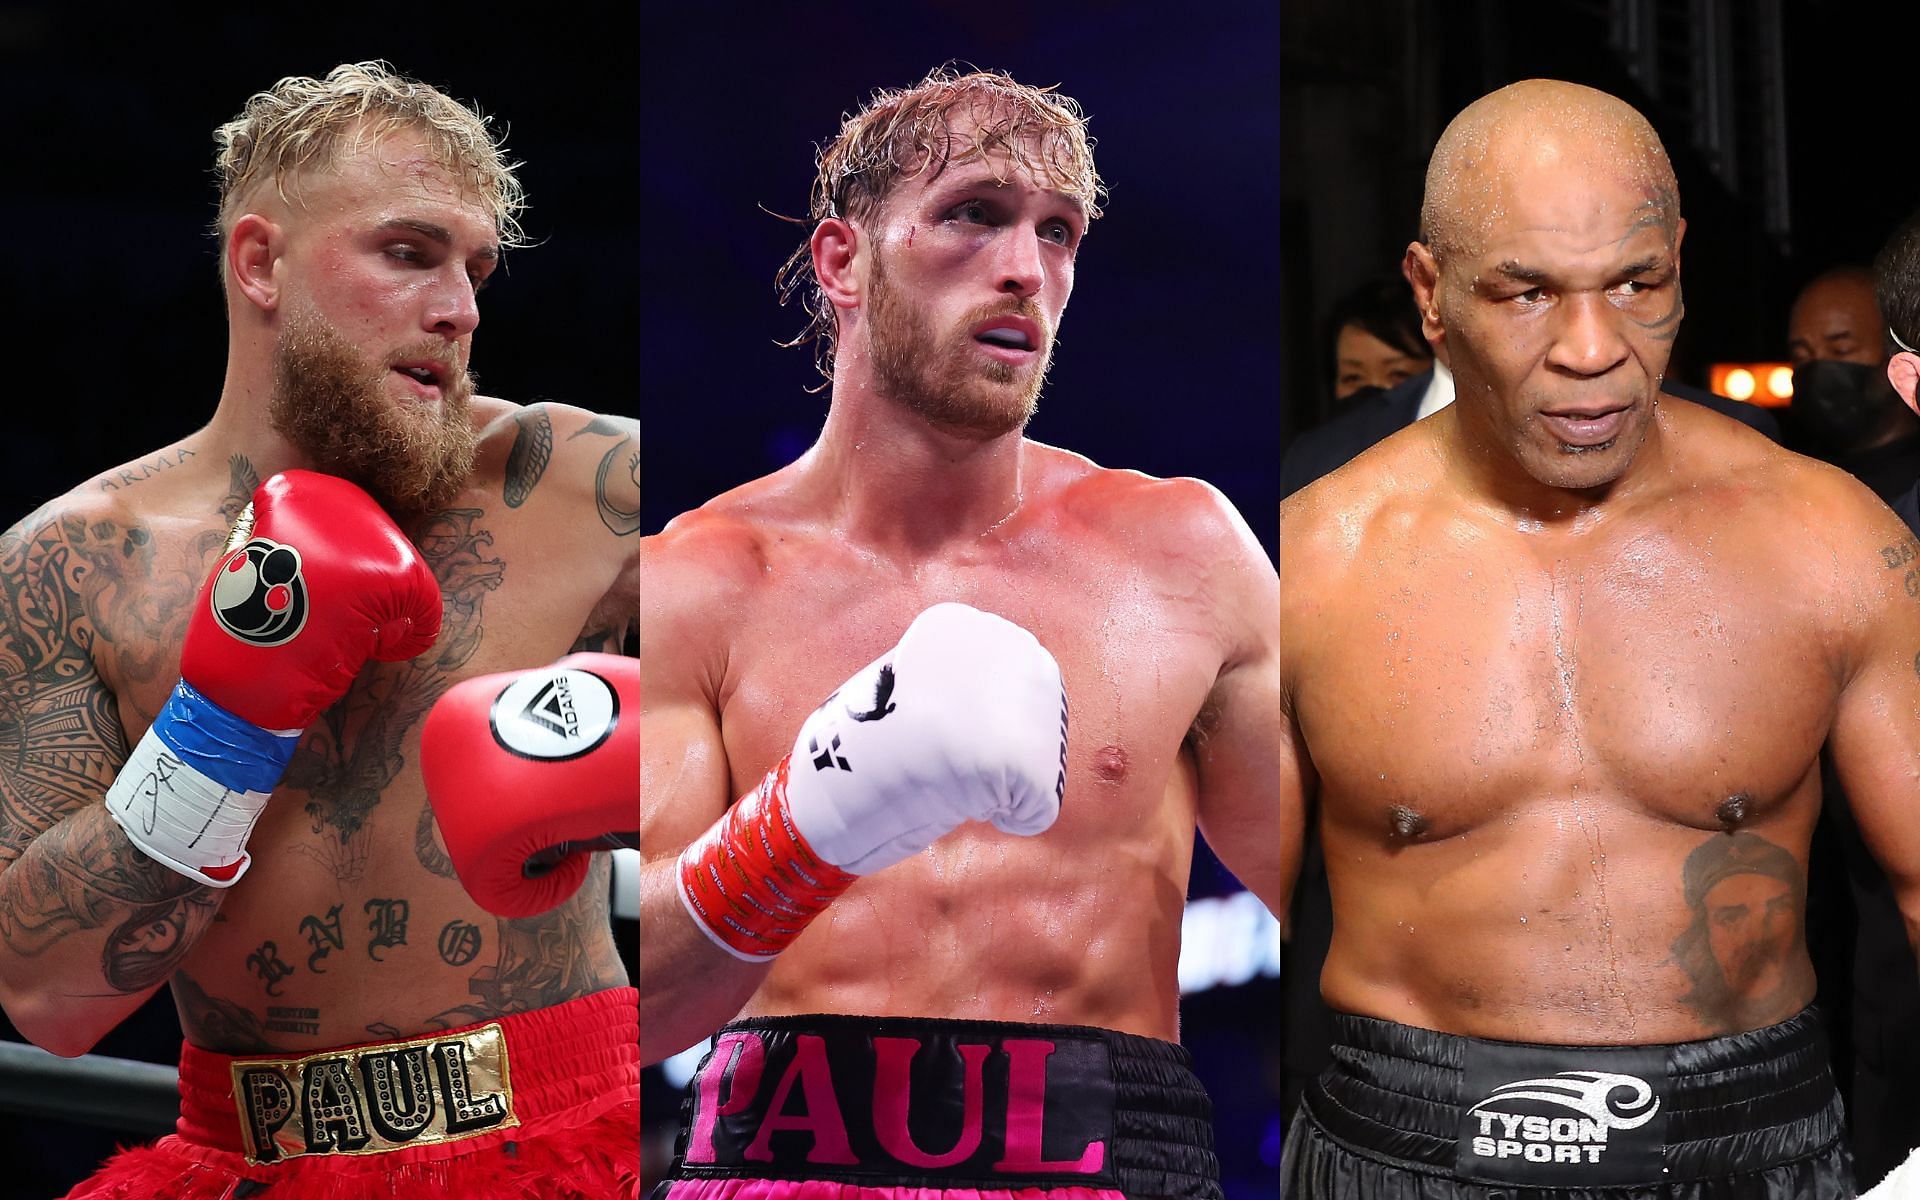 Jake Paul (left) and Logan Paul (middle) have often claimed to be ardent fans of Mike Tyson (right) [Images courtesy: Getty Images]